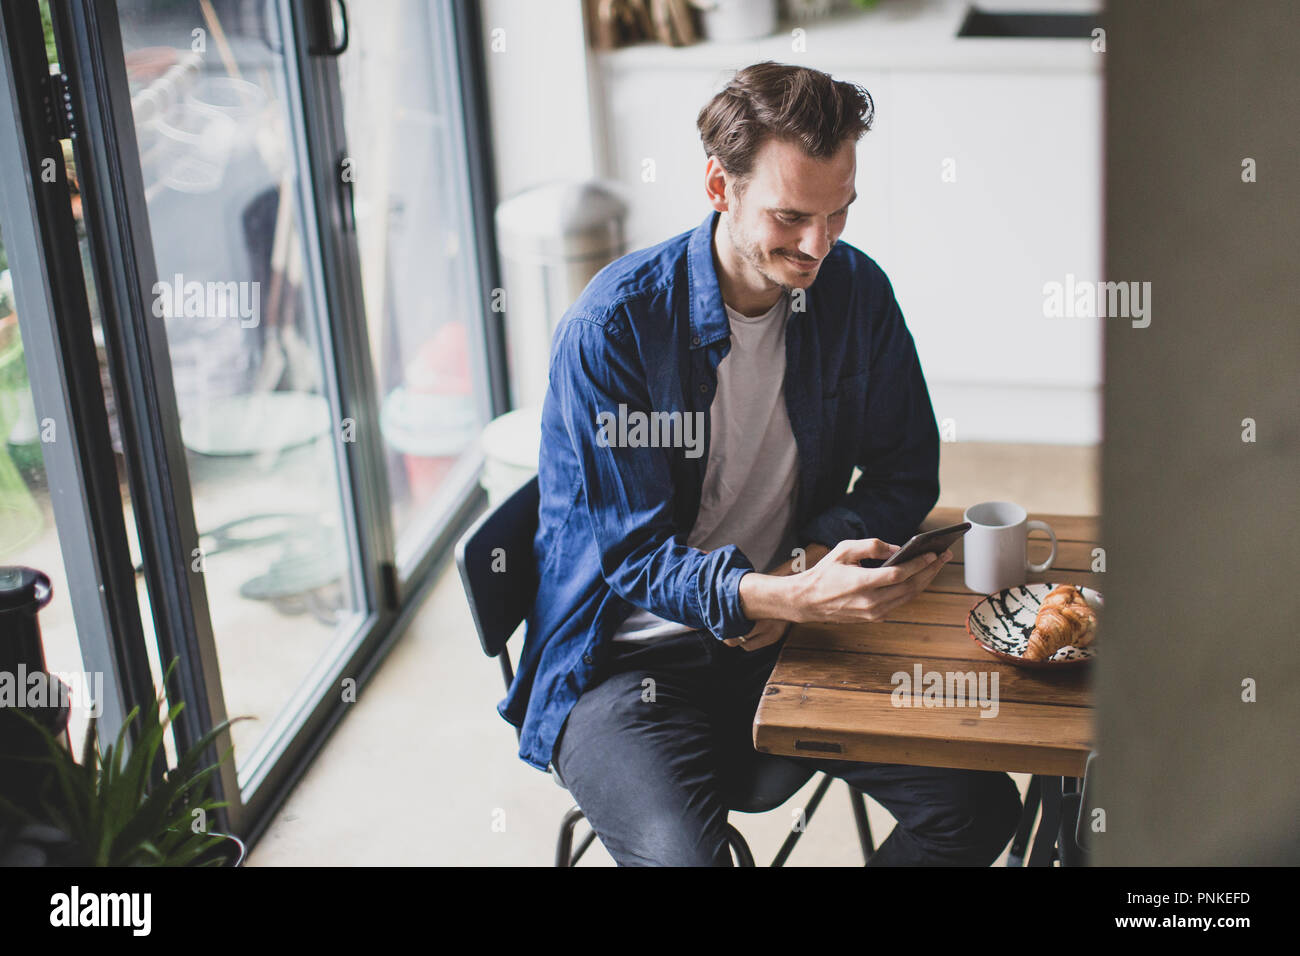 High angle shot of adult male checking smartphone in kitchen with mug of coffee Stock Photo